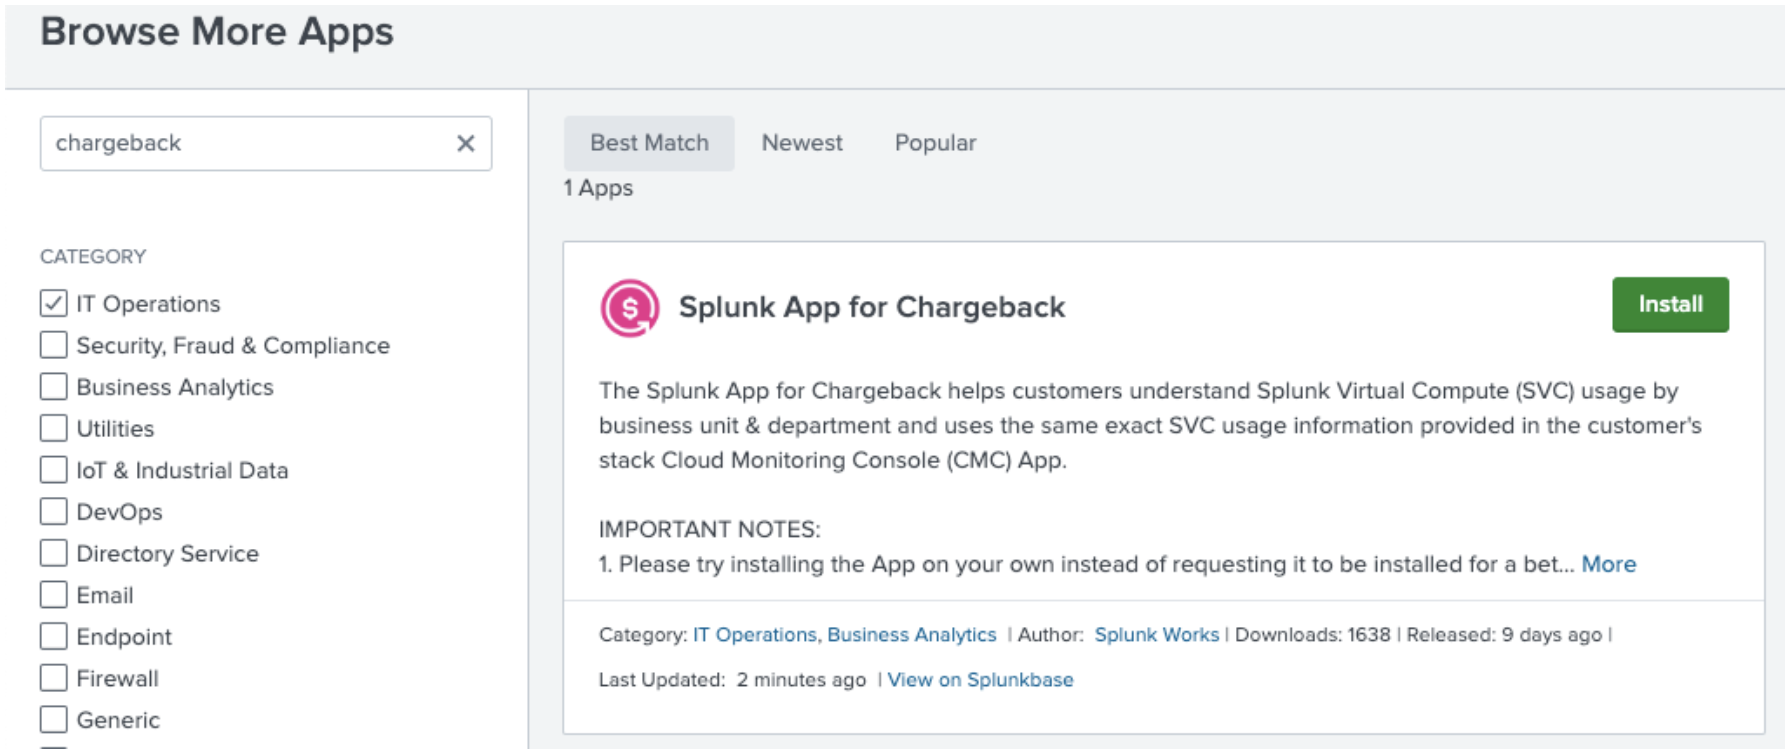 This image shows the "Browse More Apps" interface in Splunk Web. The term "chargeback" is entered in the app search box and the Splunk App for Chargeback is displayed as ready to install.